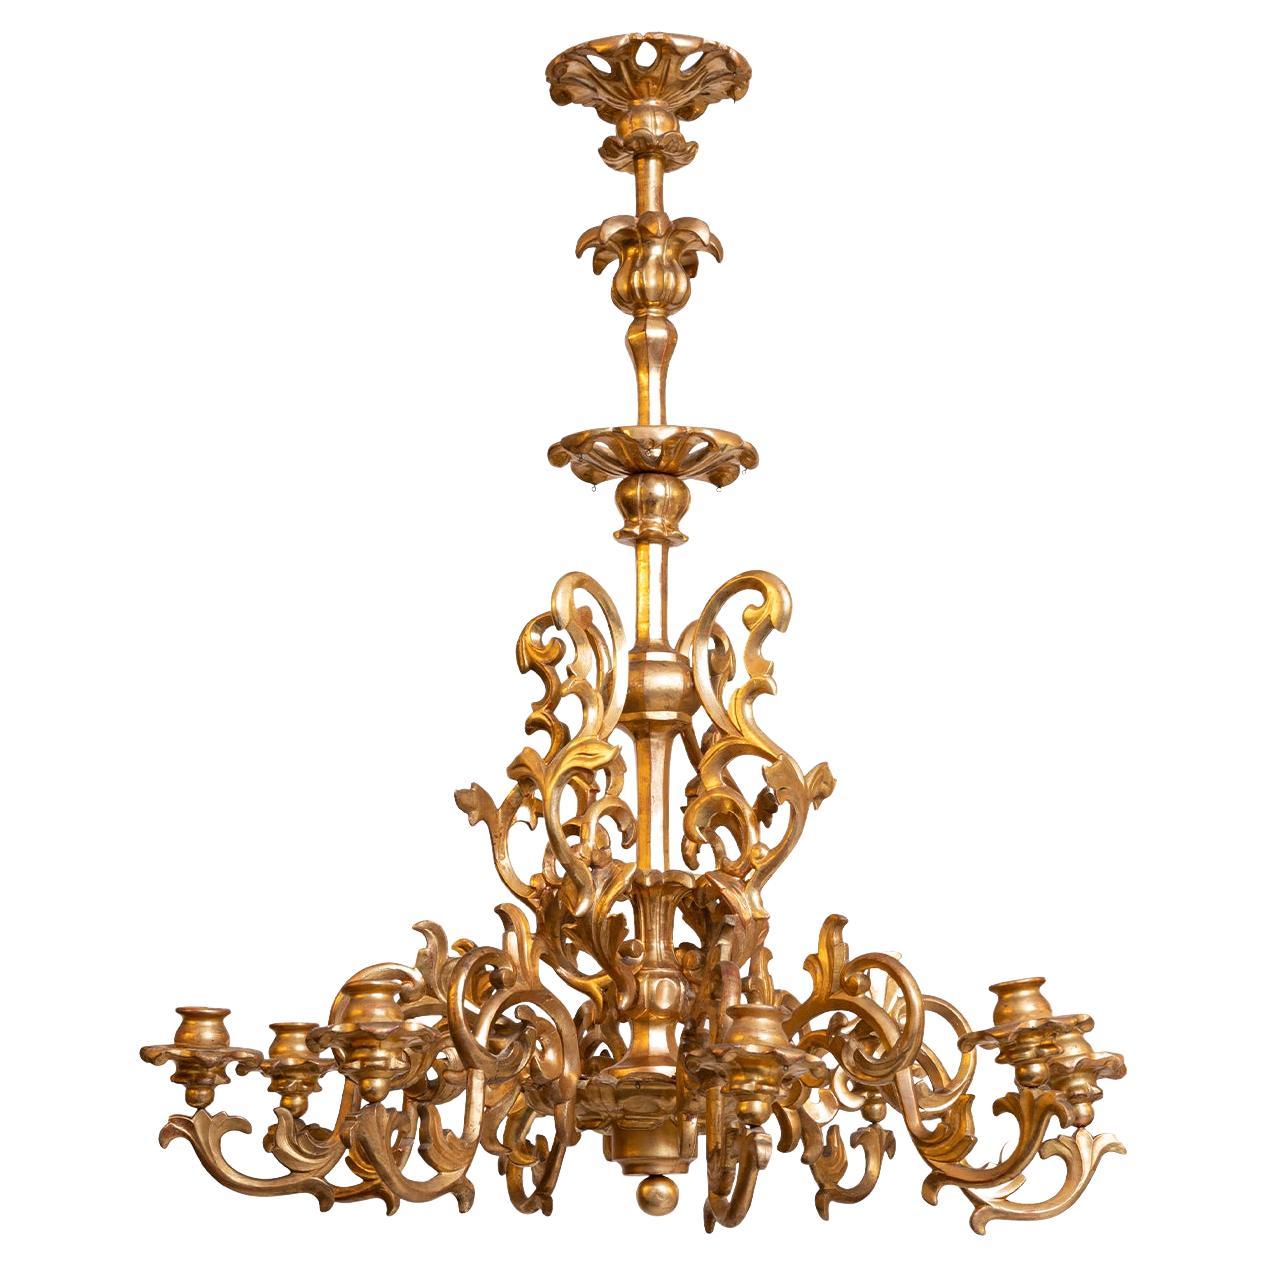 Original Maria Theresien Rococo Chandelier, Leaf Gilded, Newly Restored For Sale